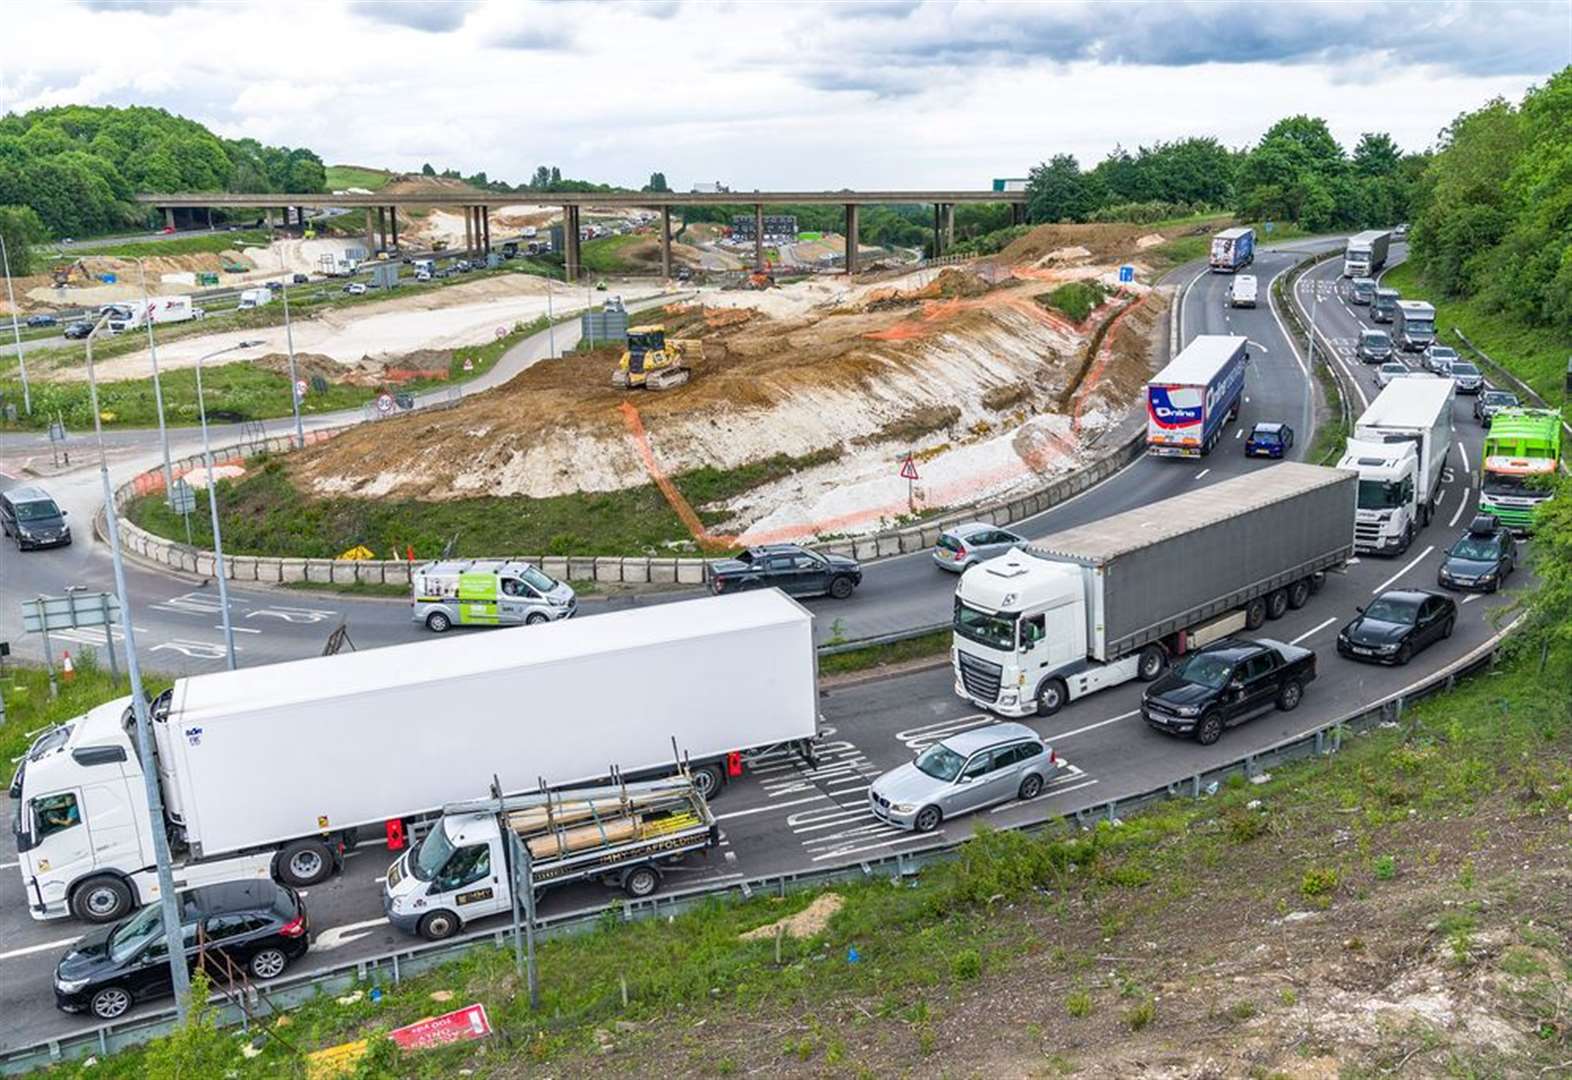 A249 closure extended as part of M2 works